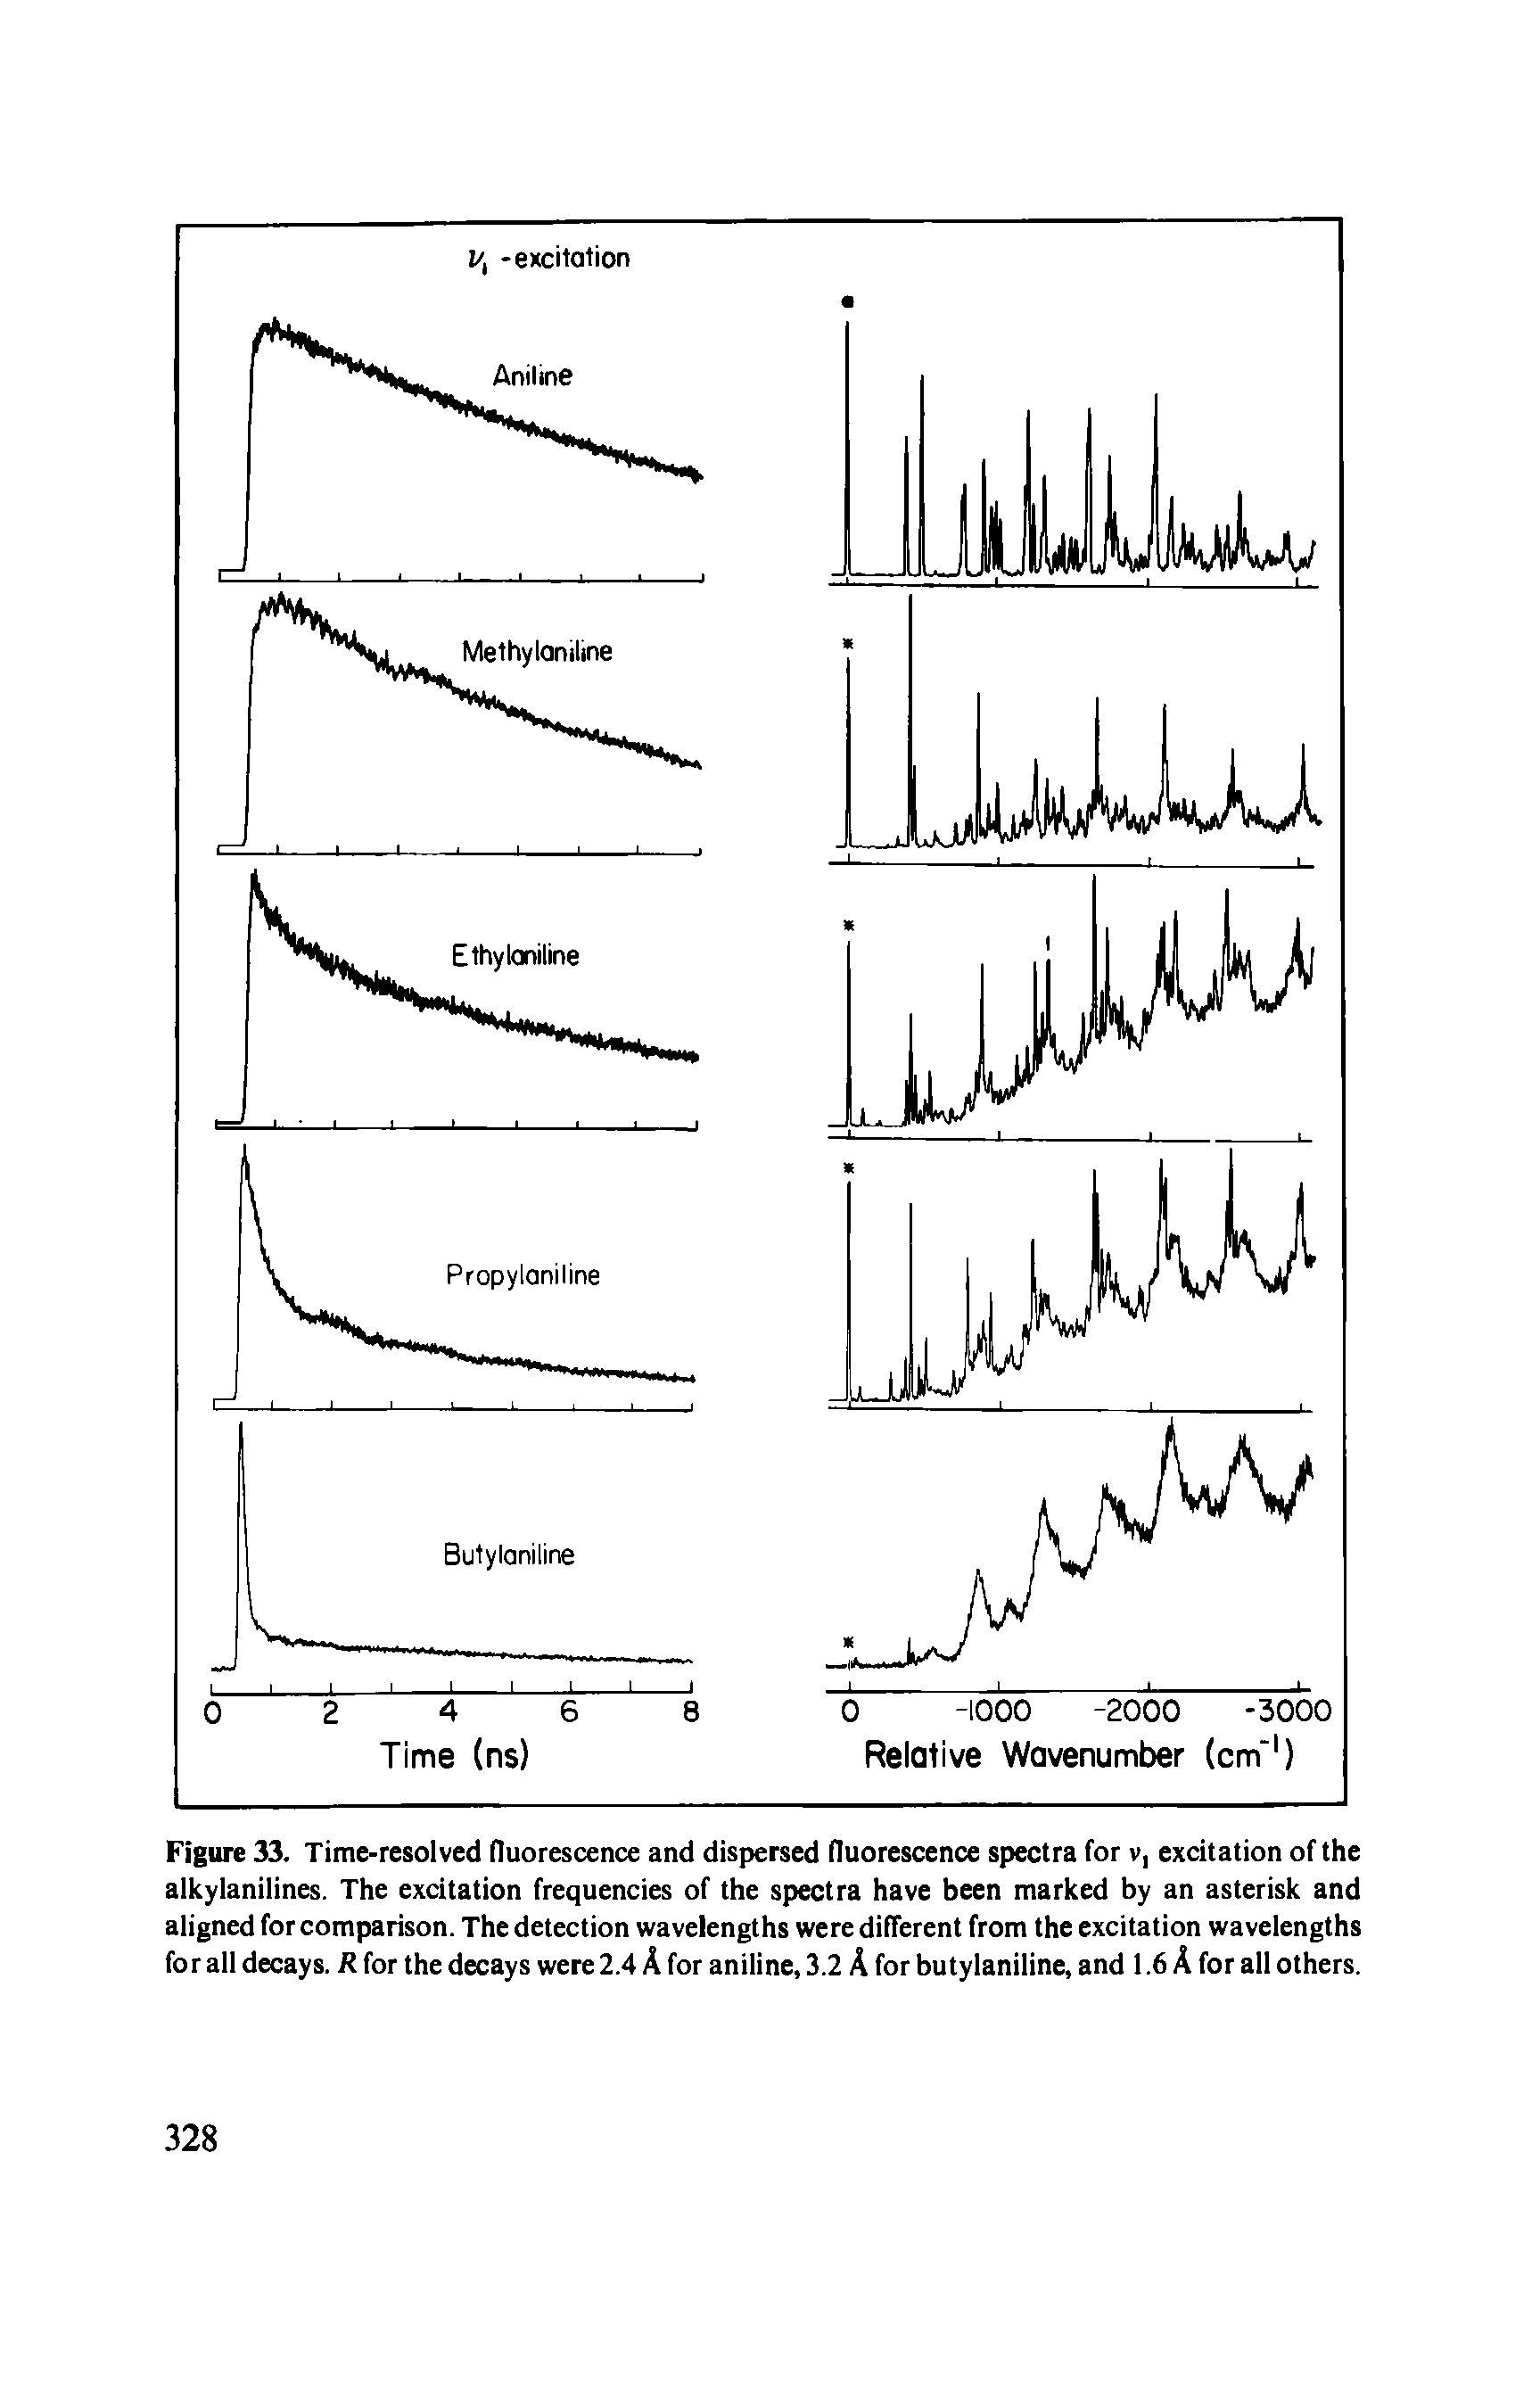 Figure 33. Time-resolved fluorescence and dispersed fluorescence spectra for v, excitation of the alkylanilines. The excitation frequencies of the spectra have been marked by an asterisk and aligned for comparison. The detection wavelengths were different from the excitation wavelengths for all decays. R for the decays were 2.4 A for aniline, 3.2 A for butylaniline, and 1.6 A for all others.